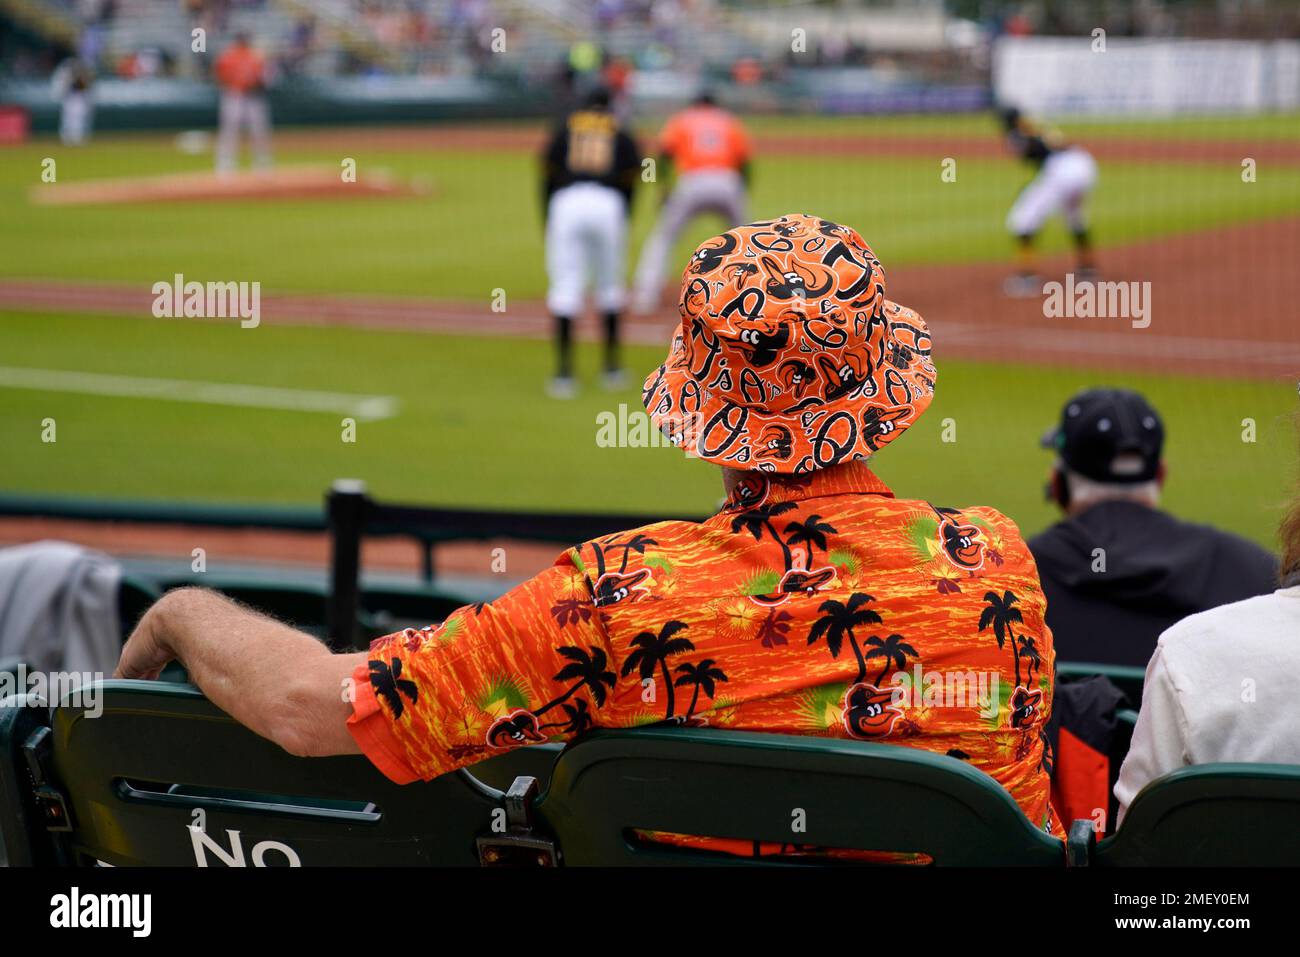 Baltimore Orioles fan Bob Kominski, center, of Mt. Lebanon, Pa., watches a  spring training exhibition baseball game between the Pittsburgh Pirates and  the Baltimore Orioles in Bradenton, Fla., Monday, March 22, 2021. (